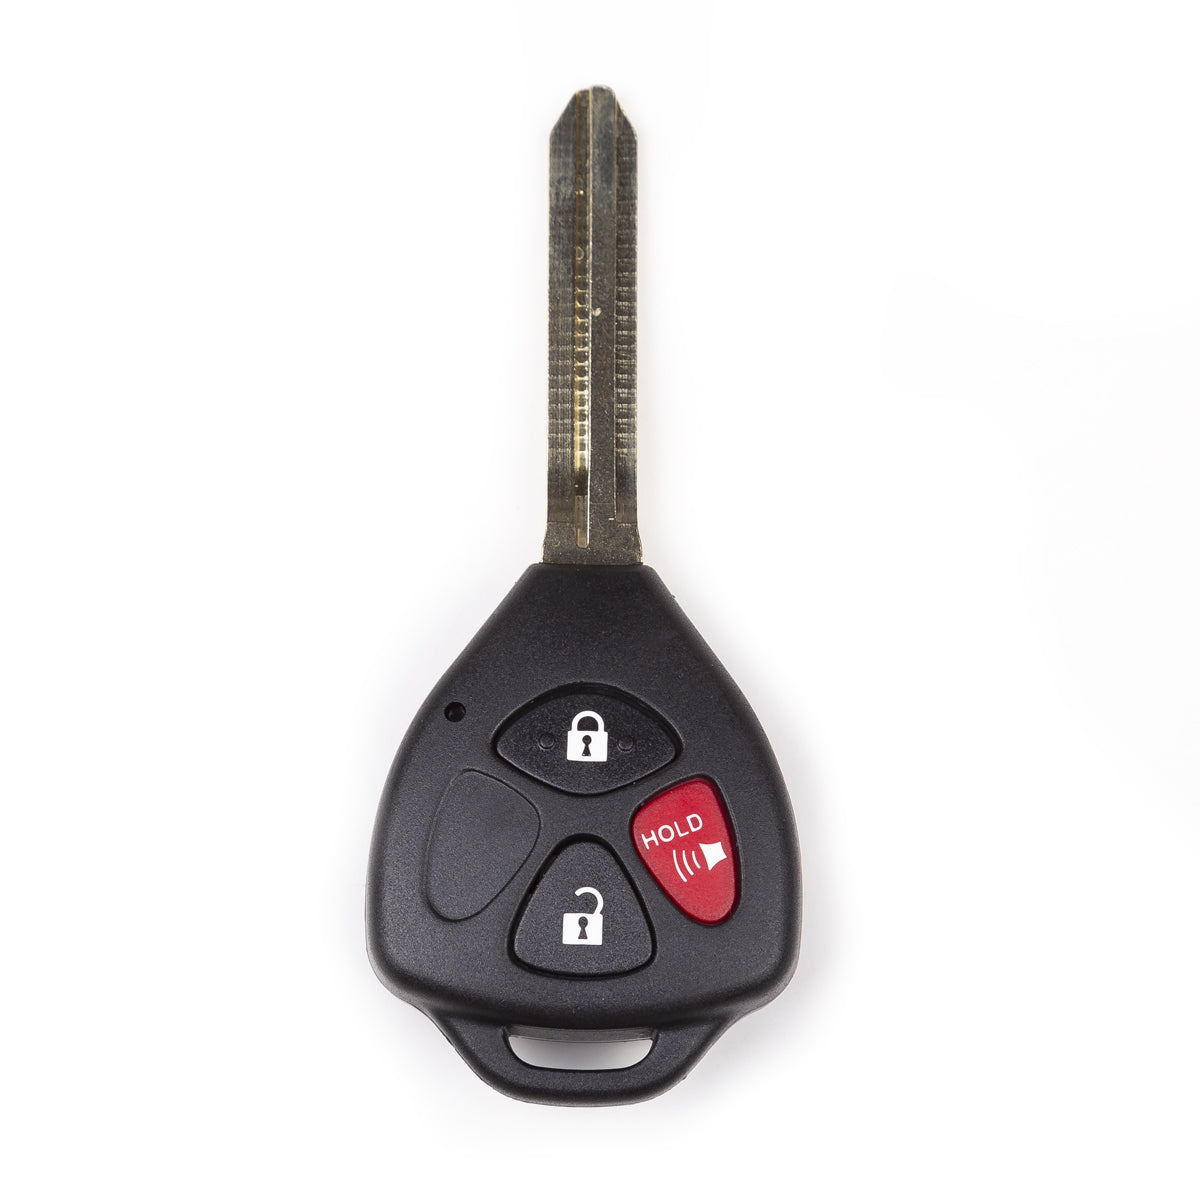 Remote Key Fob Compatible with Scion Toyota 2011 2012 2013 2014 3B FCC# MOZB41TG "G" Chip